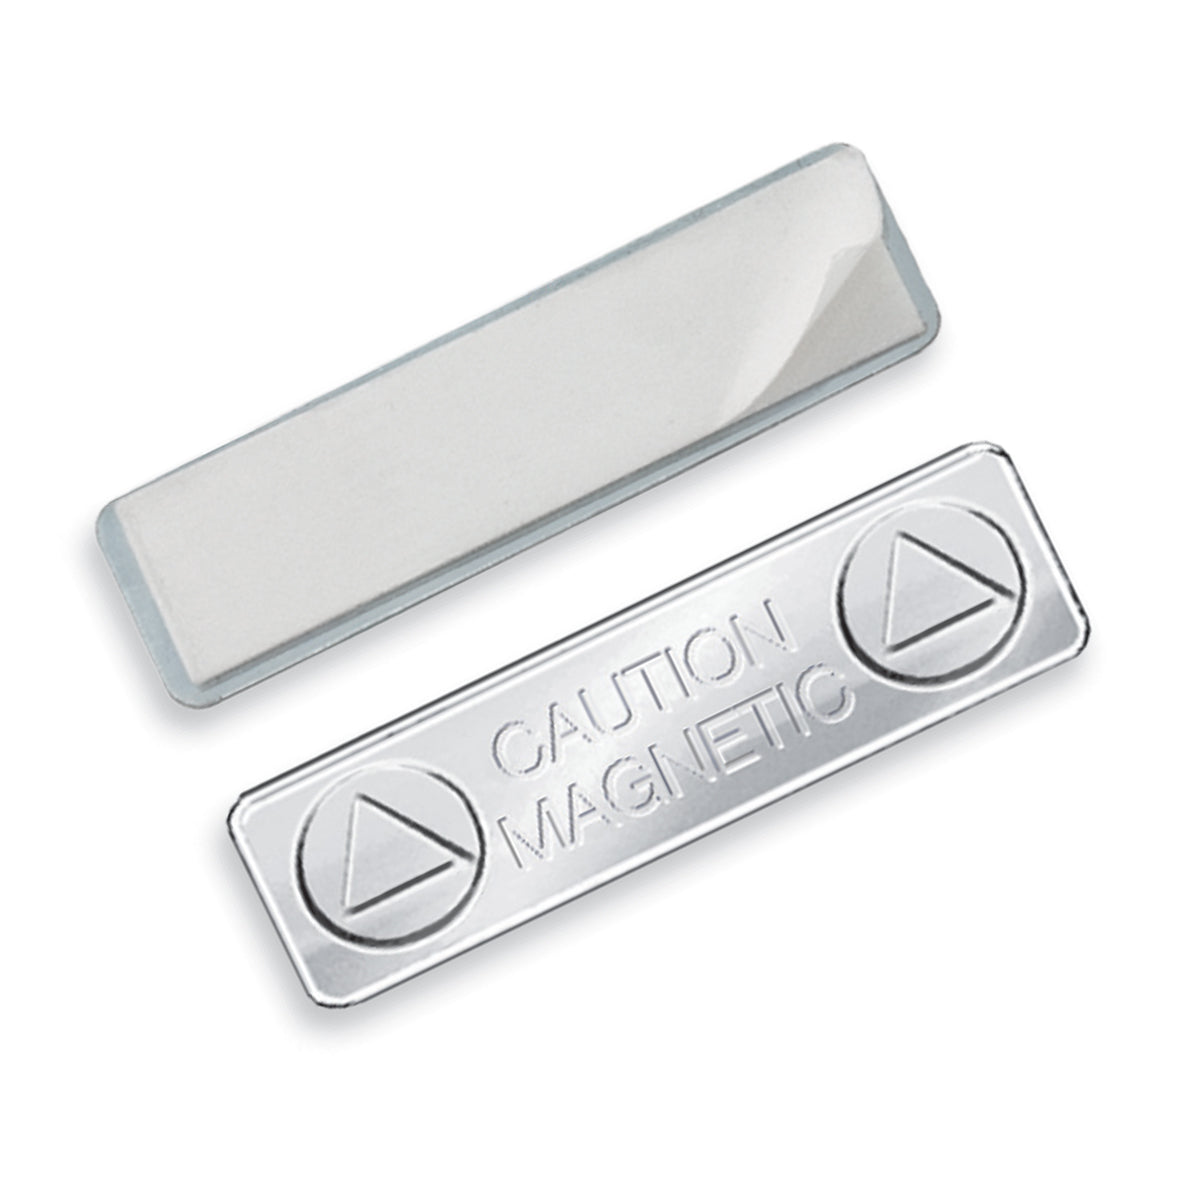 Two rectangular Magnetic ID Badge Holders: The upper one has a plain surface, and the lower one, a Magnetic ID Badge Holder Sticky Back (P/N 5730-3000), has "CAUTION MAGNETIC" inscribed on it.